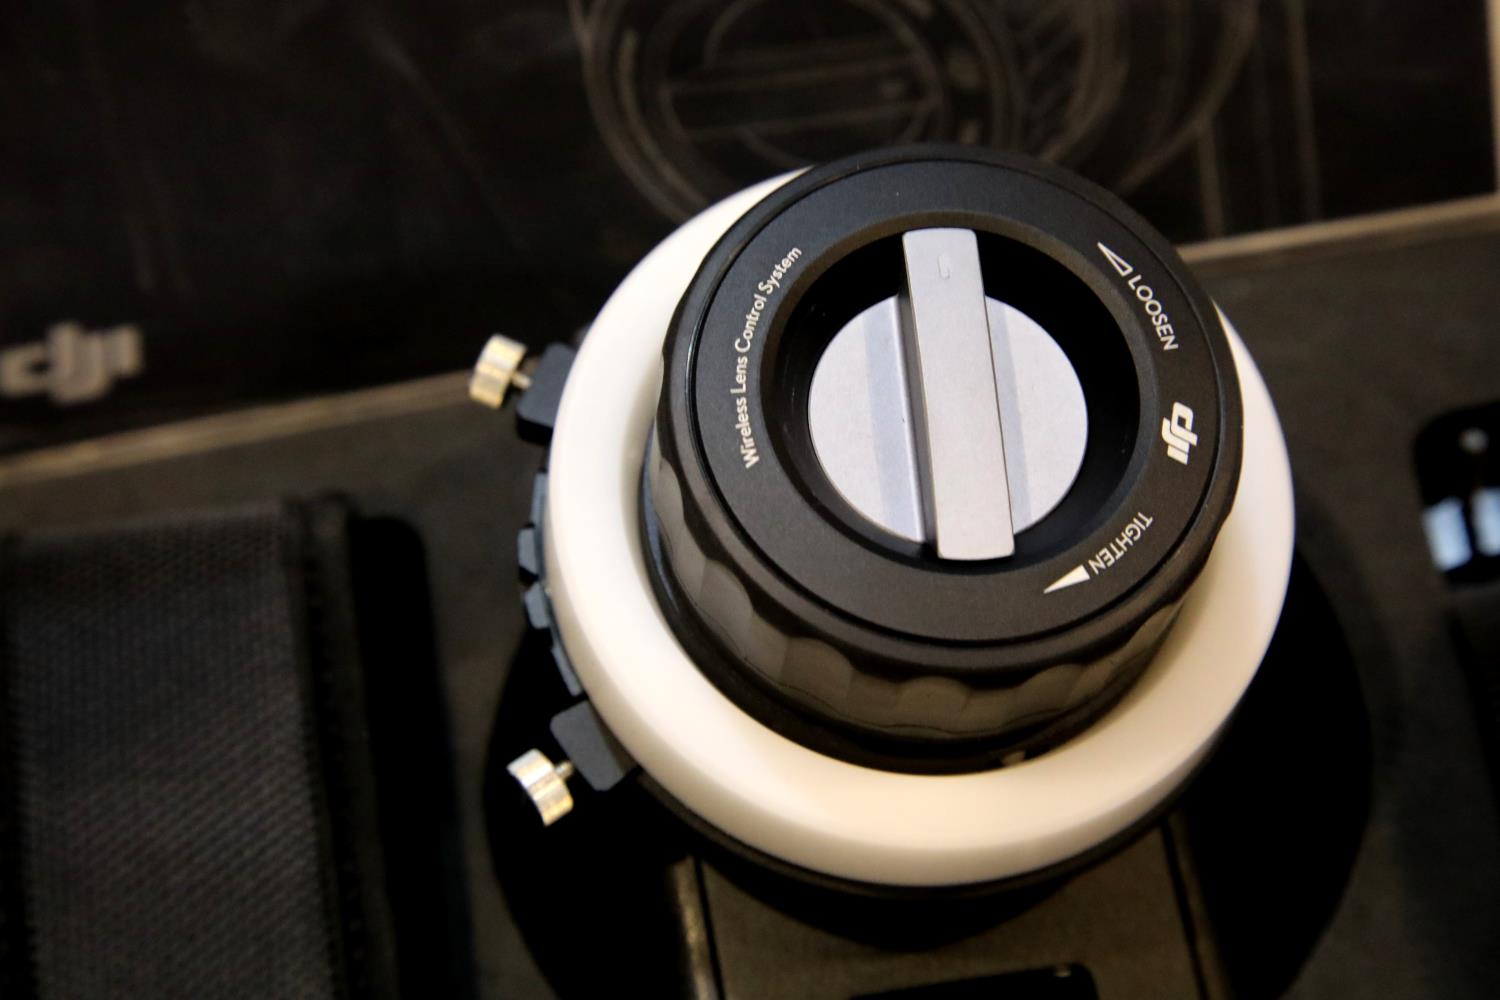 dji Focus wheel wireless lens, with straps and accessories, in a fitted DJI hard case. P&P Group - Image 3 of 5